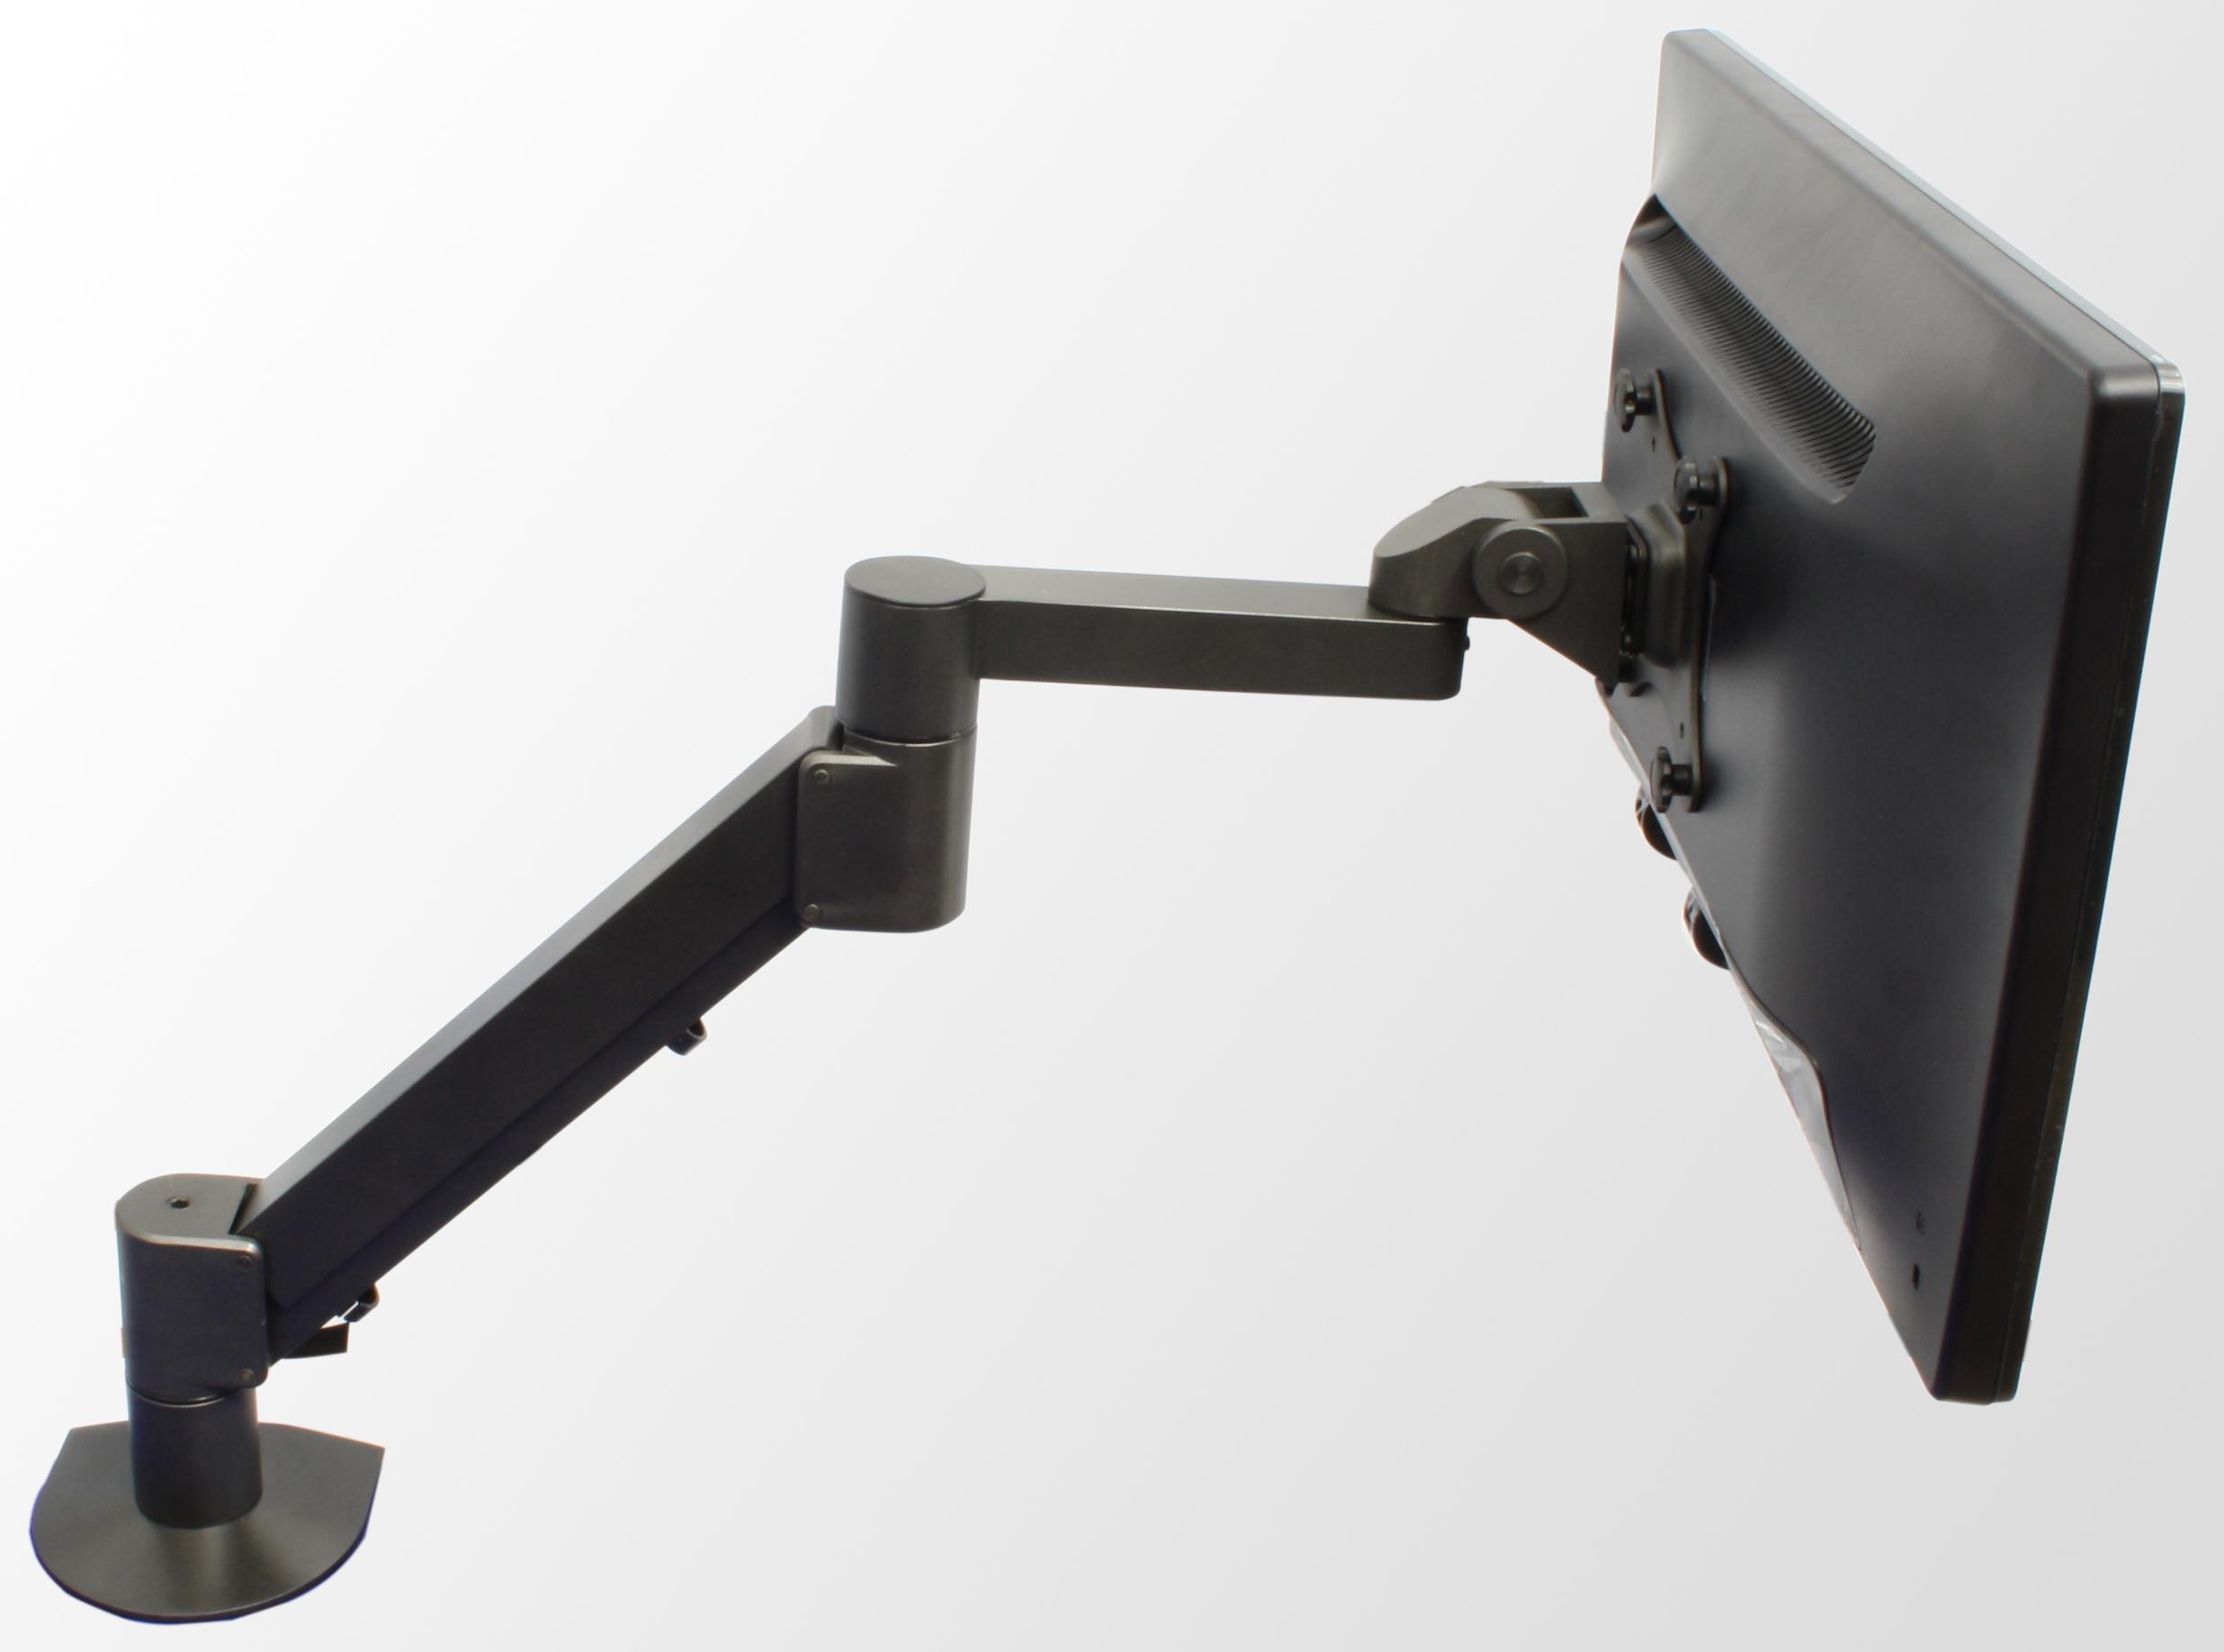 Monitor arm connected to a monitor